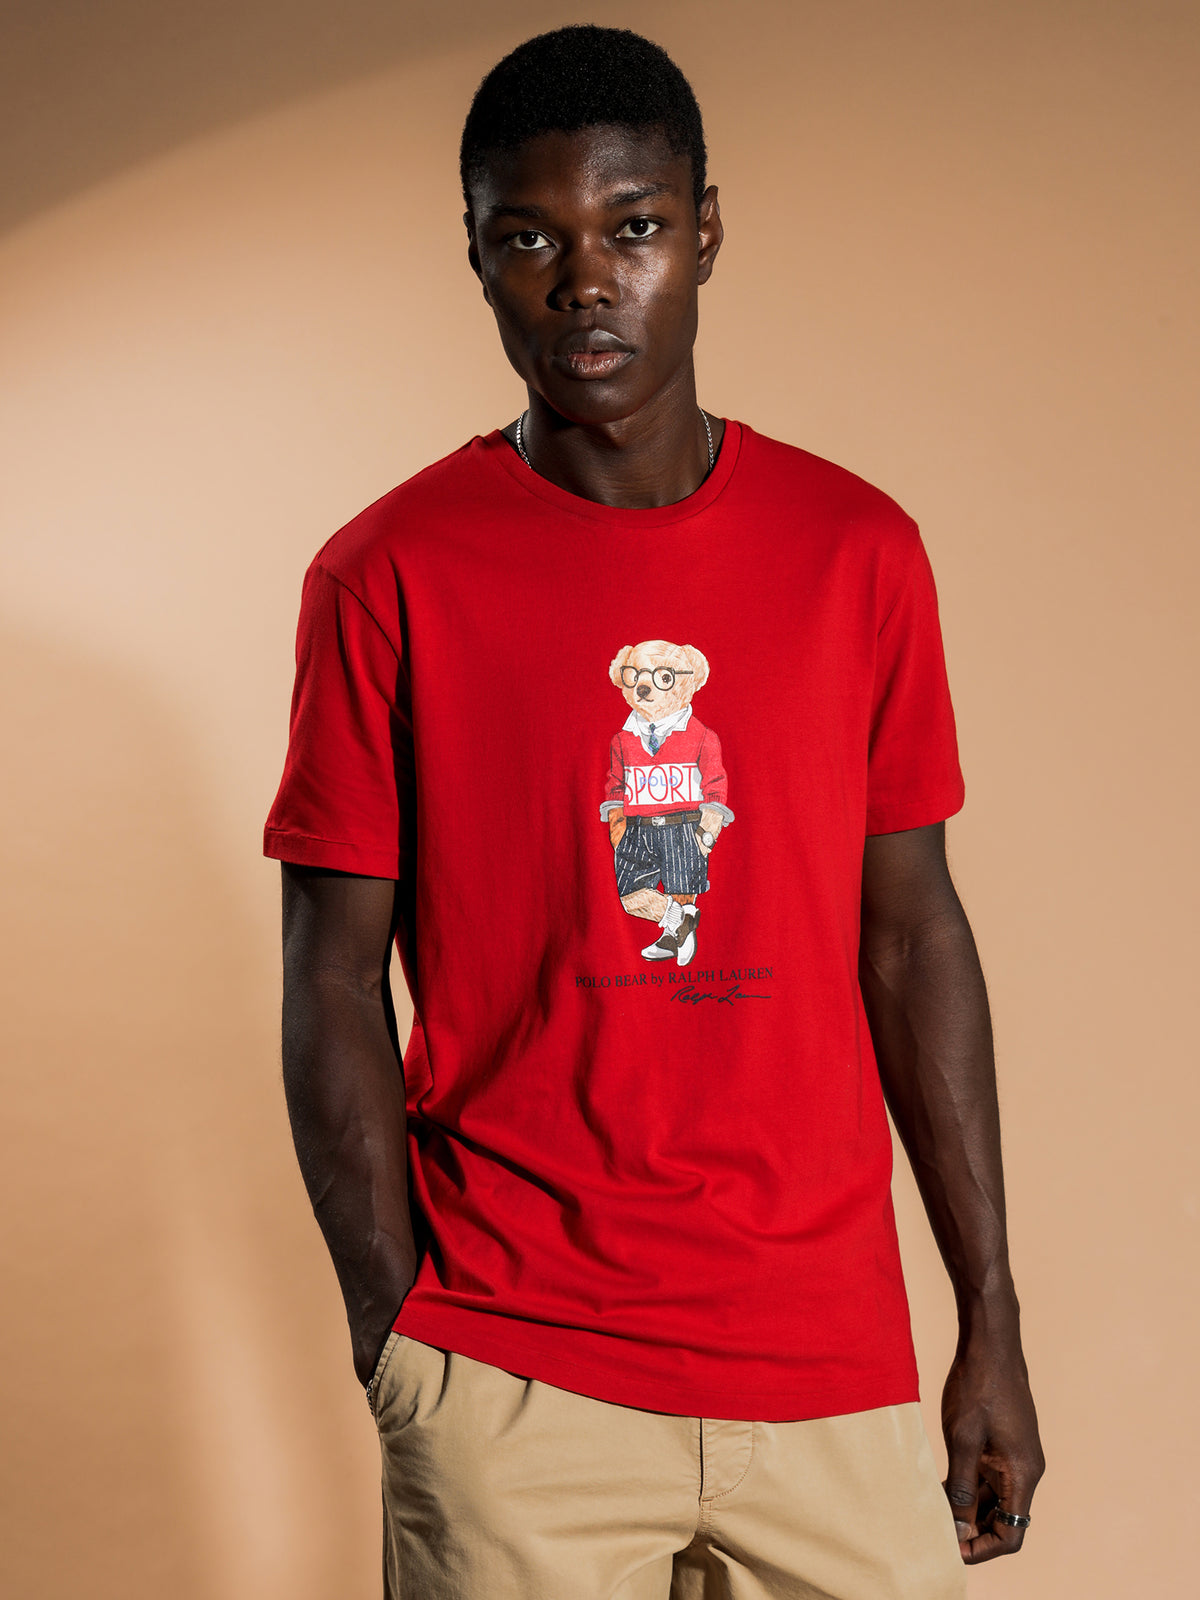 Polo Sport Bear Crew T-Shirt in Red